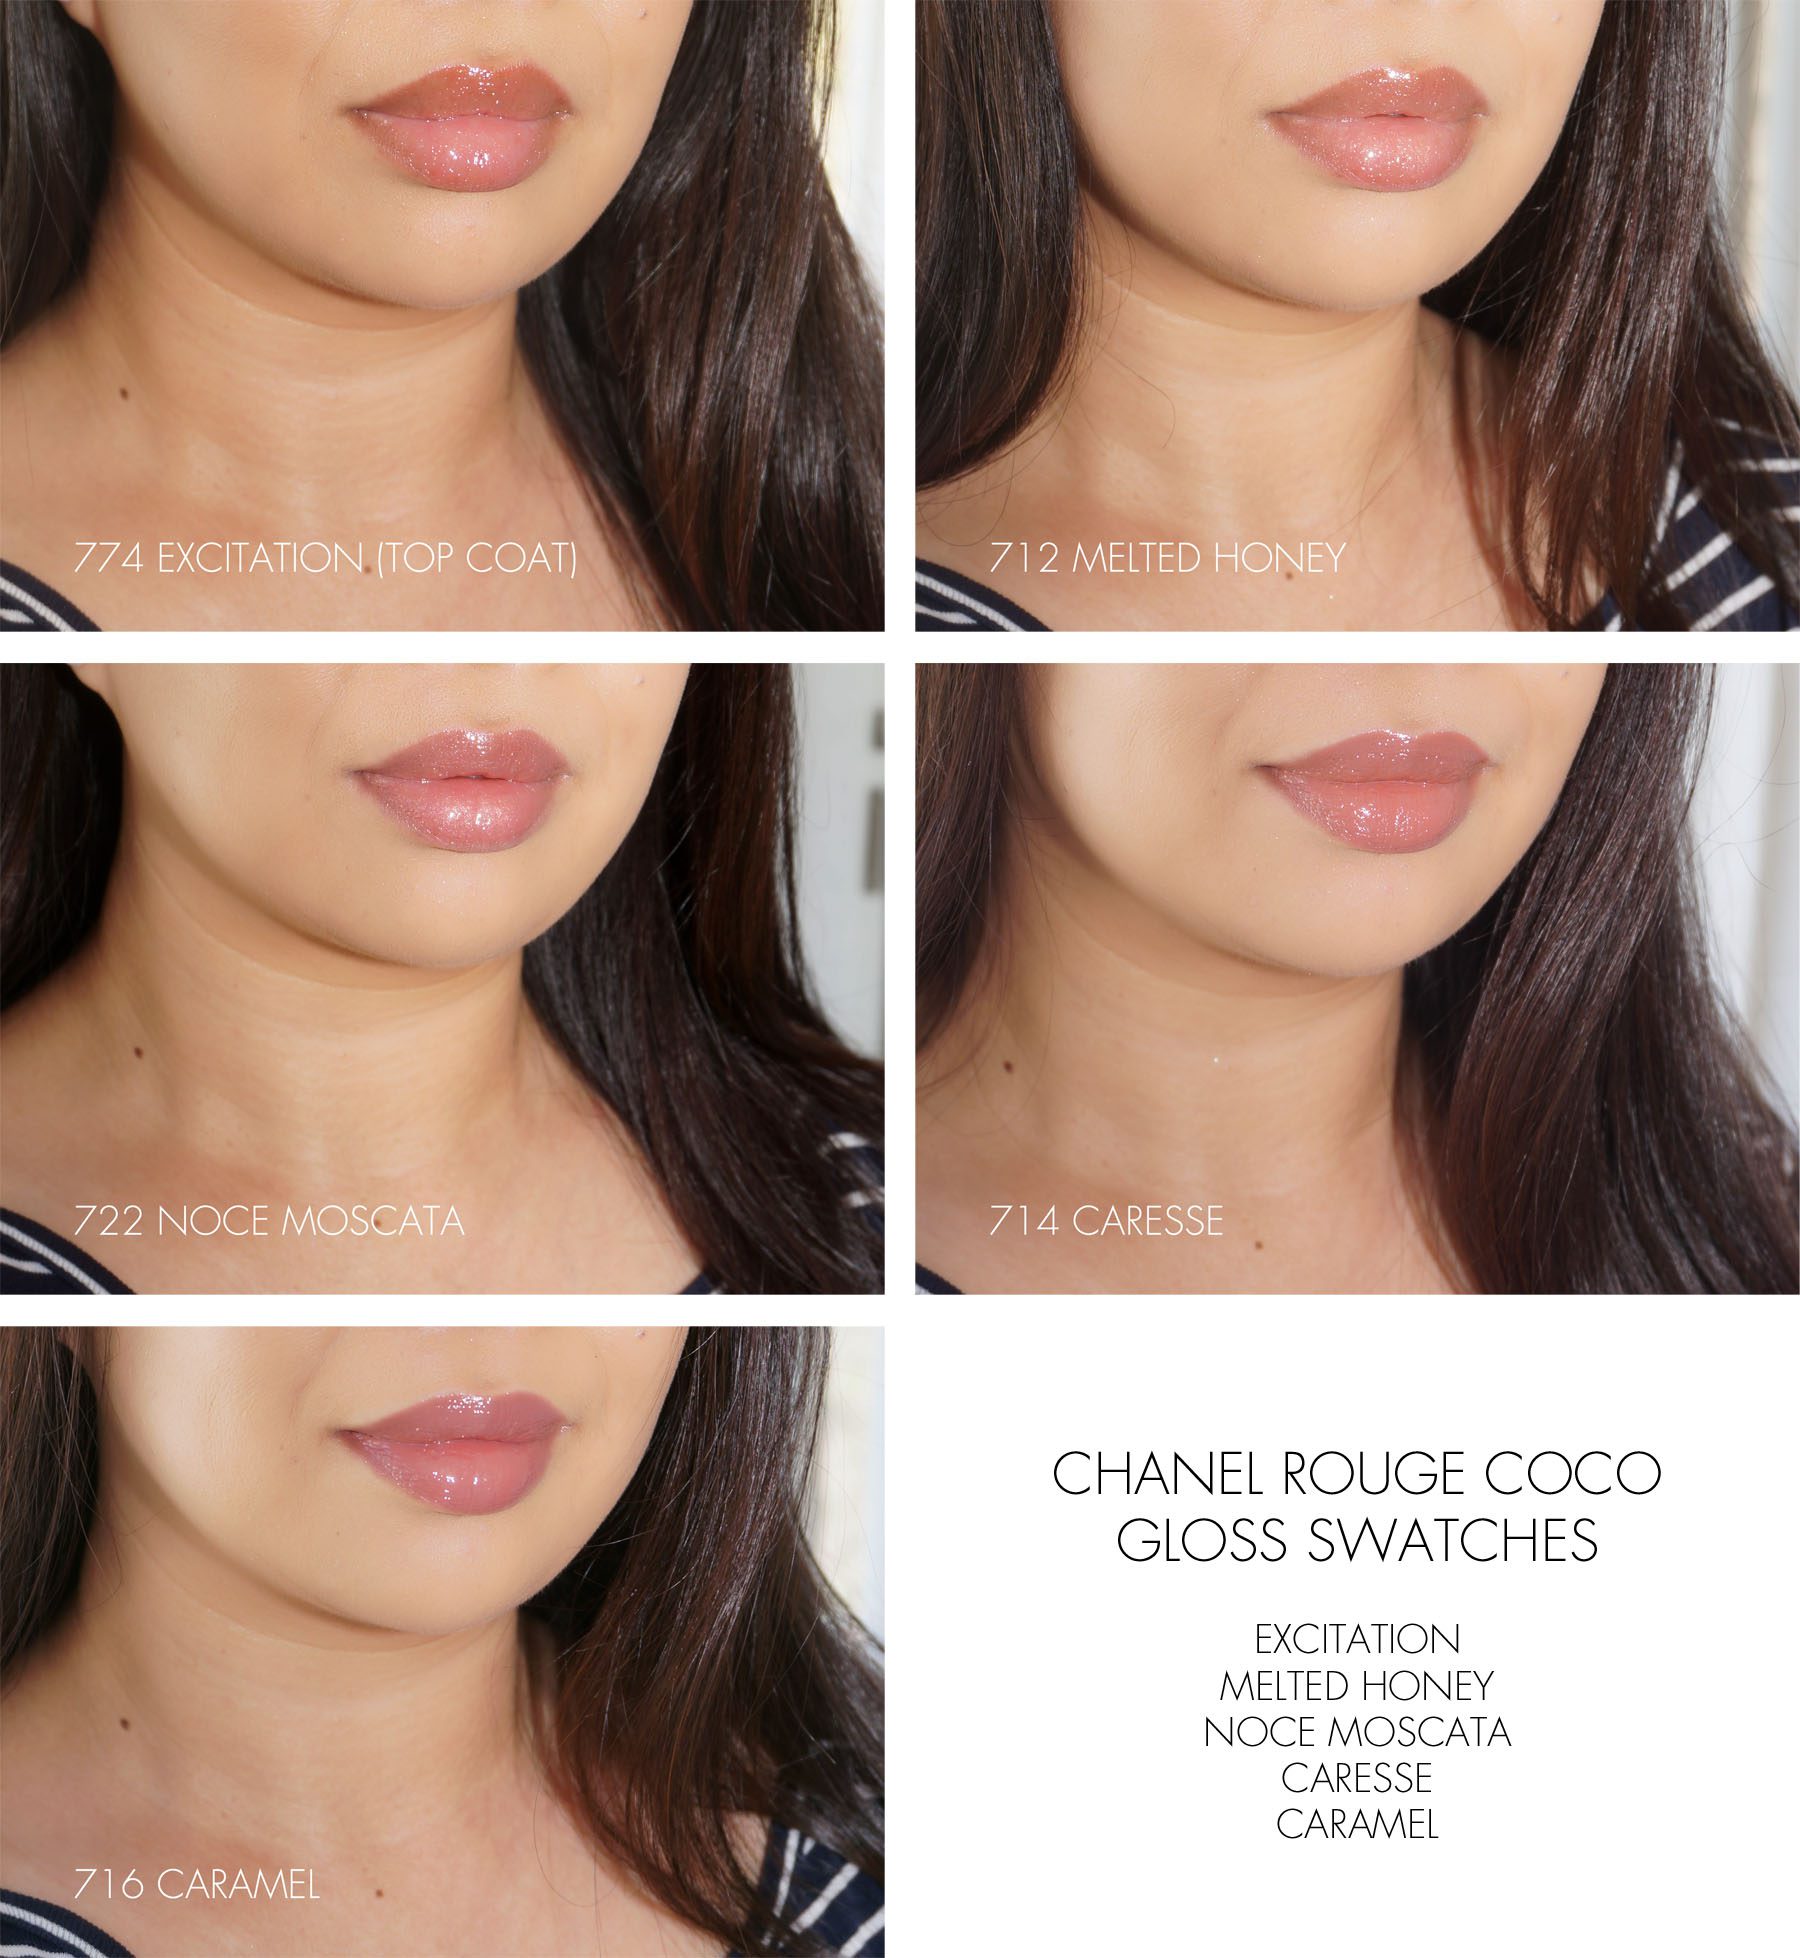 Charles Keasing Nerve metal Chanel Rouge Coco Gloss Review + Swatches - The Beauty Look Book